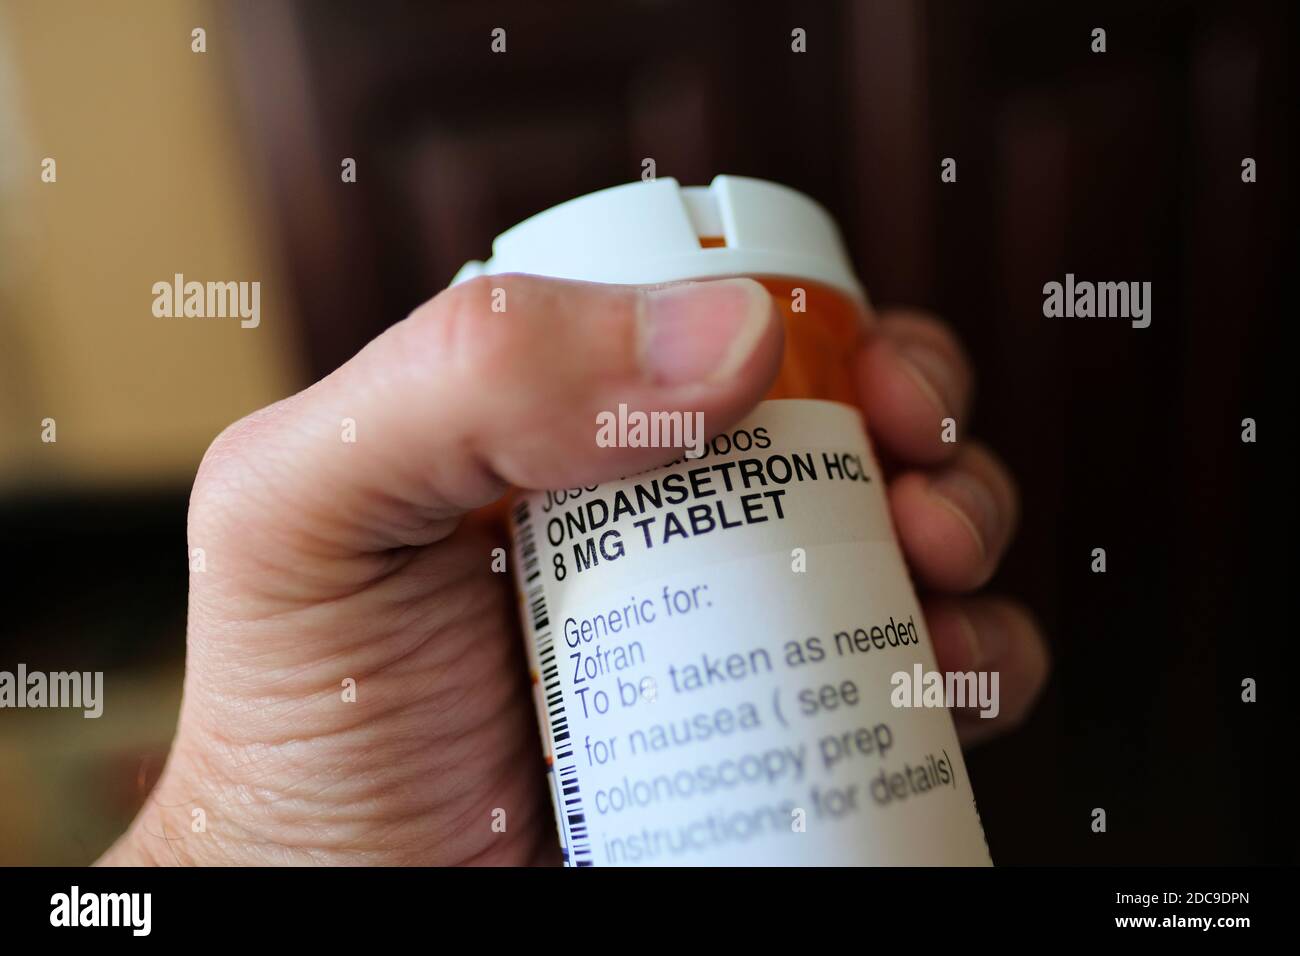 A man's hand holding an ondansetron pill bottle; used to prevent nausea and vomiting caused by surgery, cancer chemotherapy, radiation, colonoscopy. Stock Photo